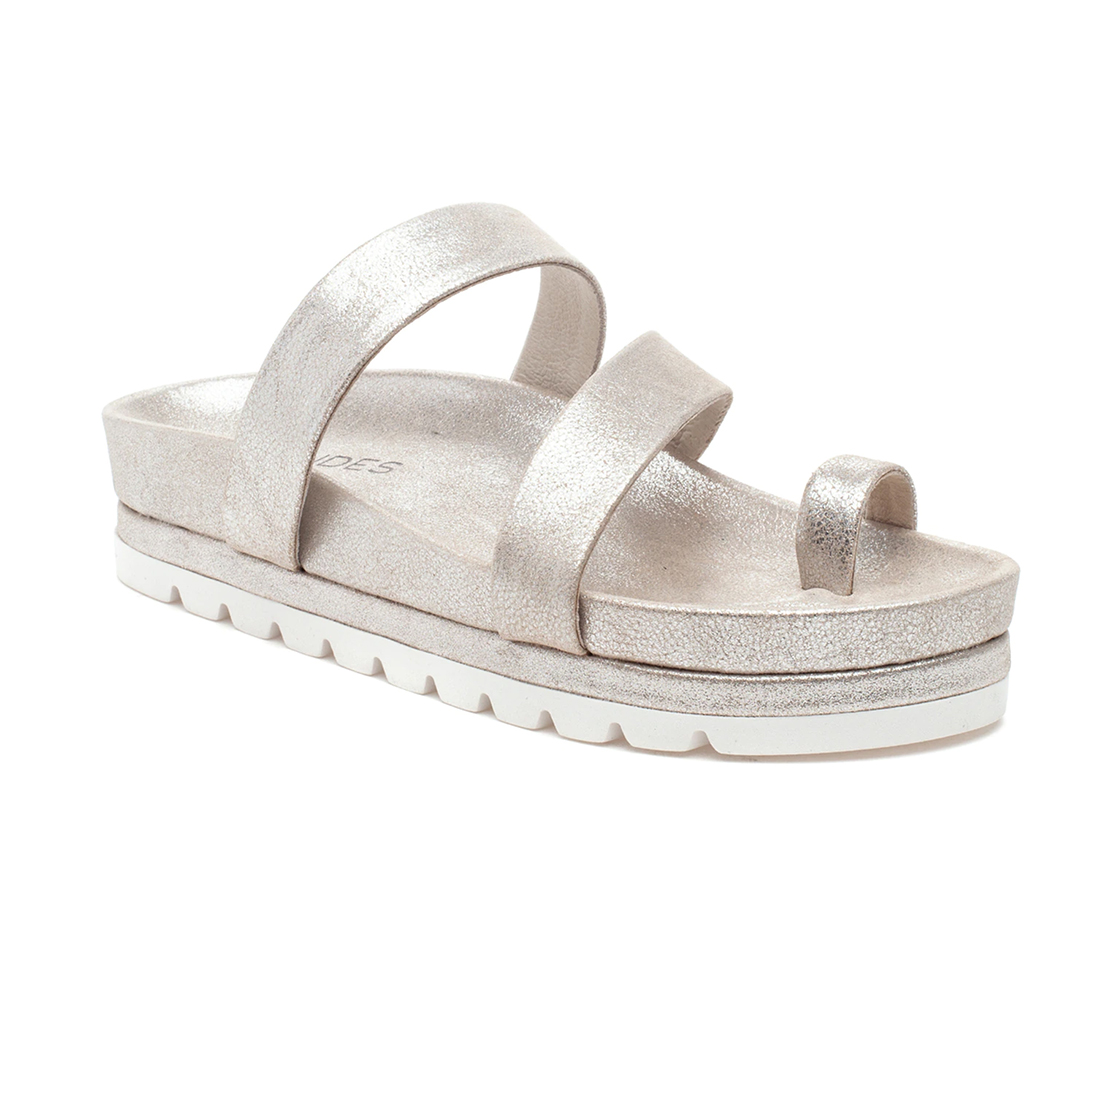 Steve Madden Travel Clear Sandal | Cotton Island Women's Clothing Boutique